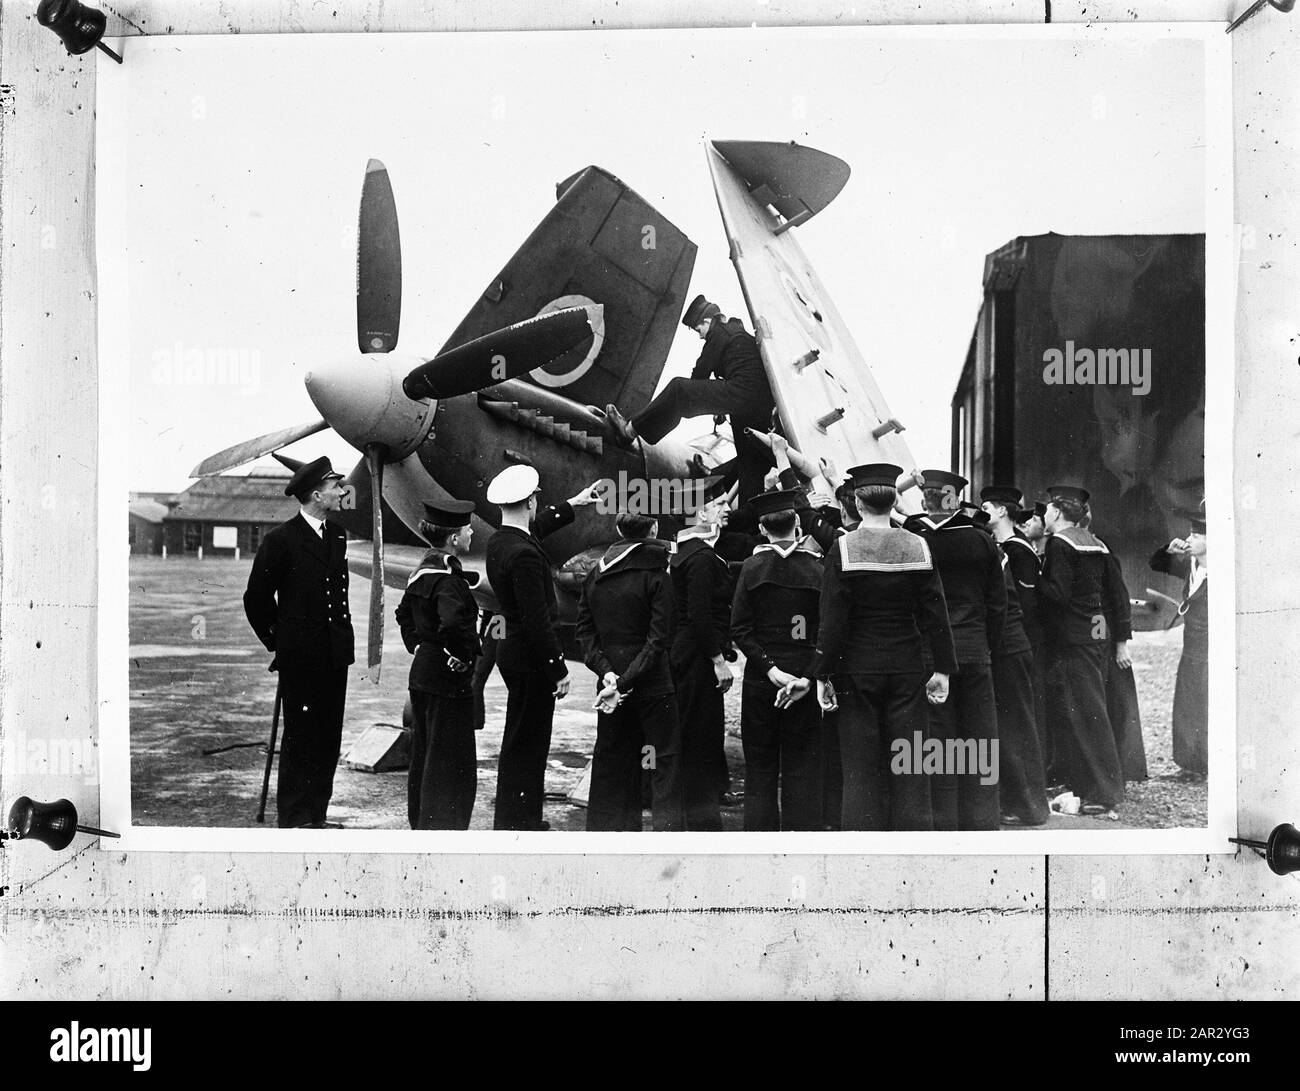 Reproduction Marvo. Sailors by plane with folding wings Date: July 16, 1948 Keywords: Sailors, ALANE Personname: Wings Setup Name: Marvo Stock Photo